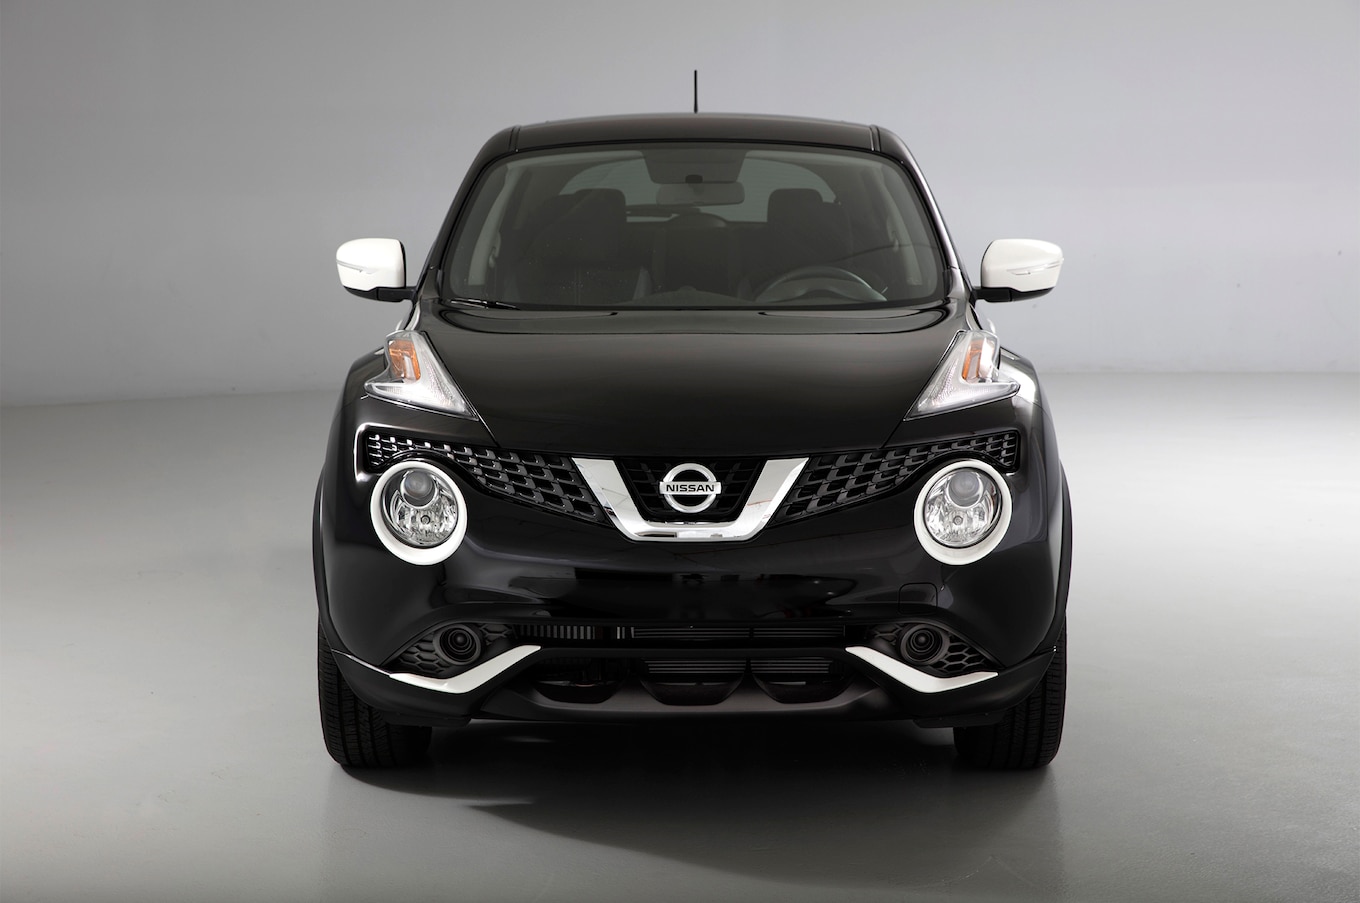 2017 Nissan Juke Black Pearl Edition front end